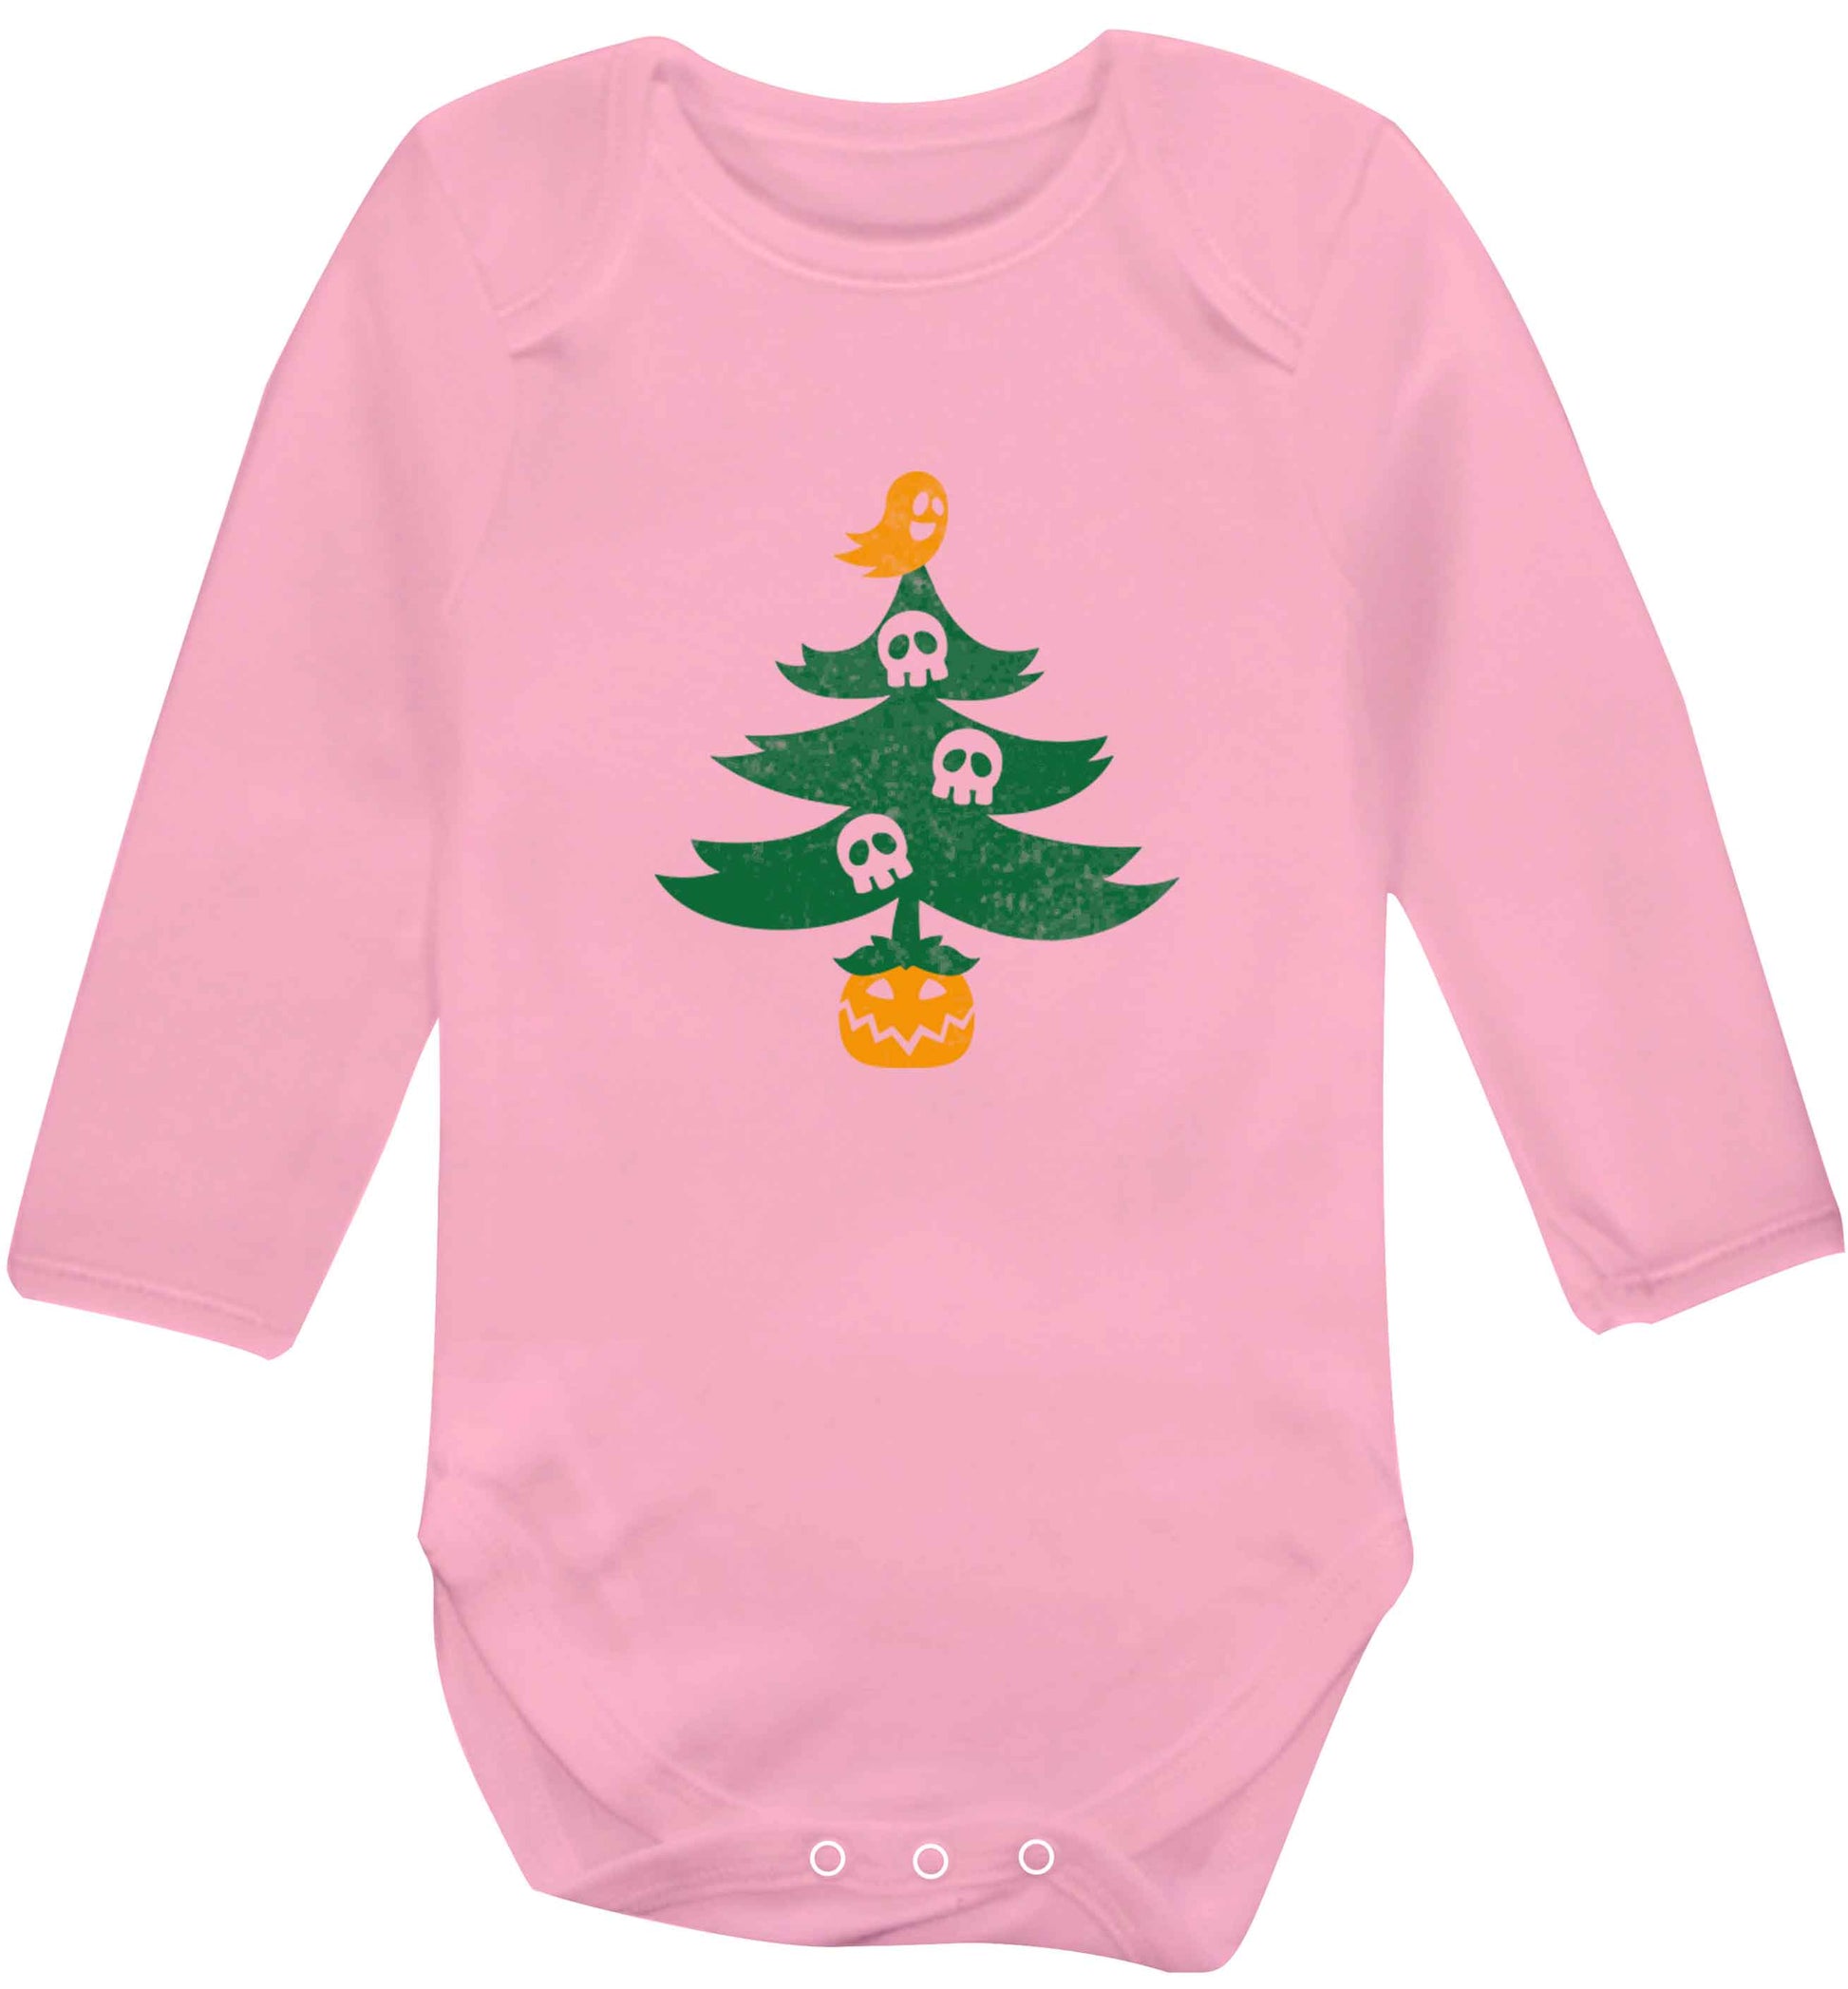 Halloween Christmas tree baby vest long sleeved pale pink 6-12 months